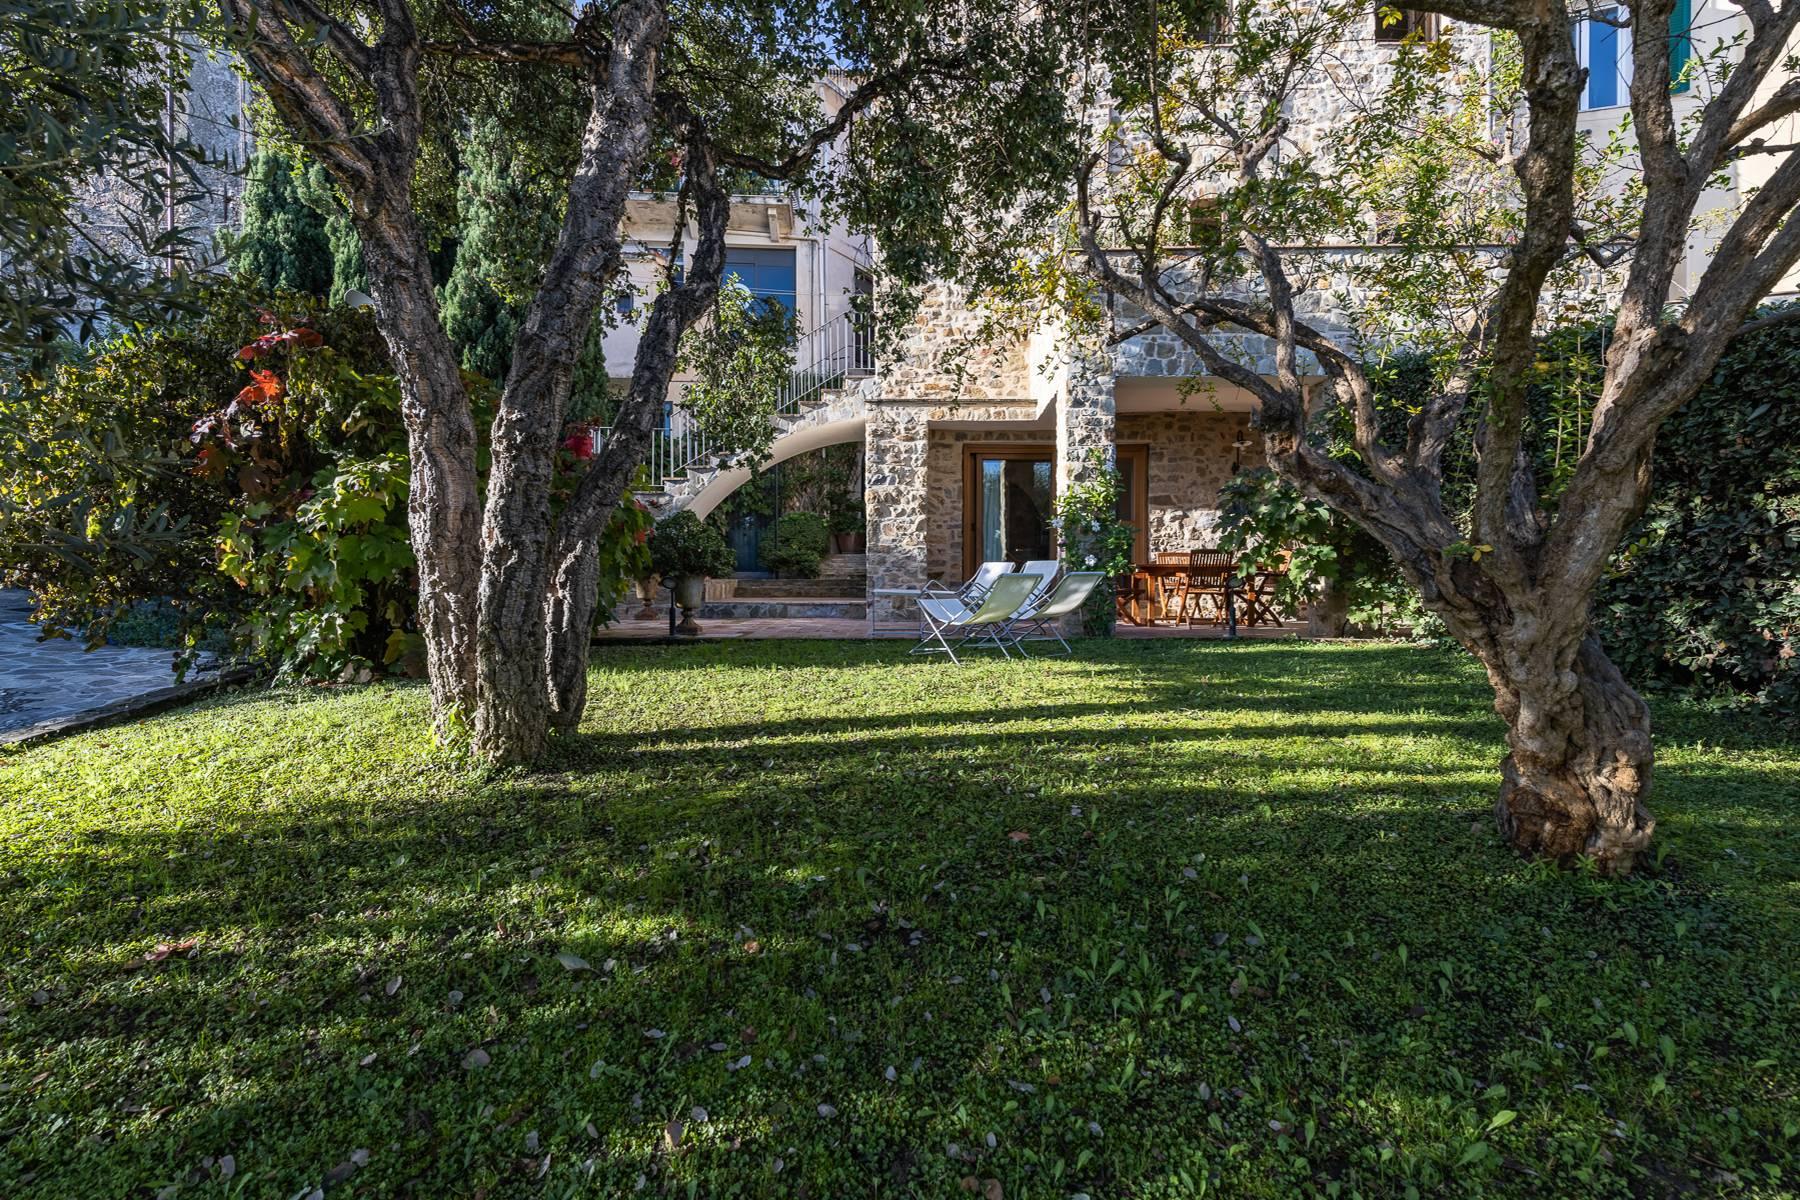 Charming villa in Torre Saracena, nestled in a tiny historic village overlooking Sanremo - Private Auction - 9